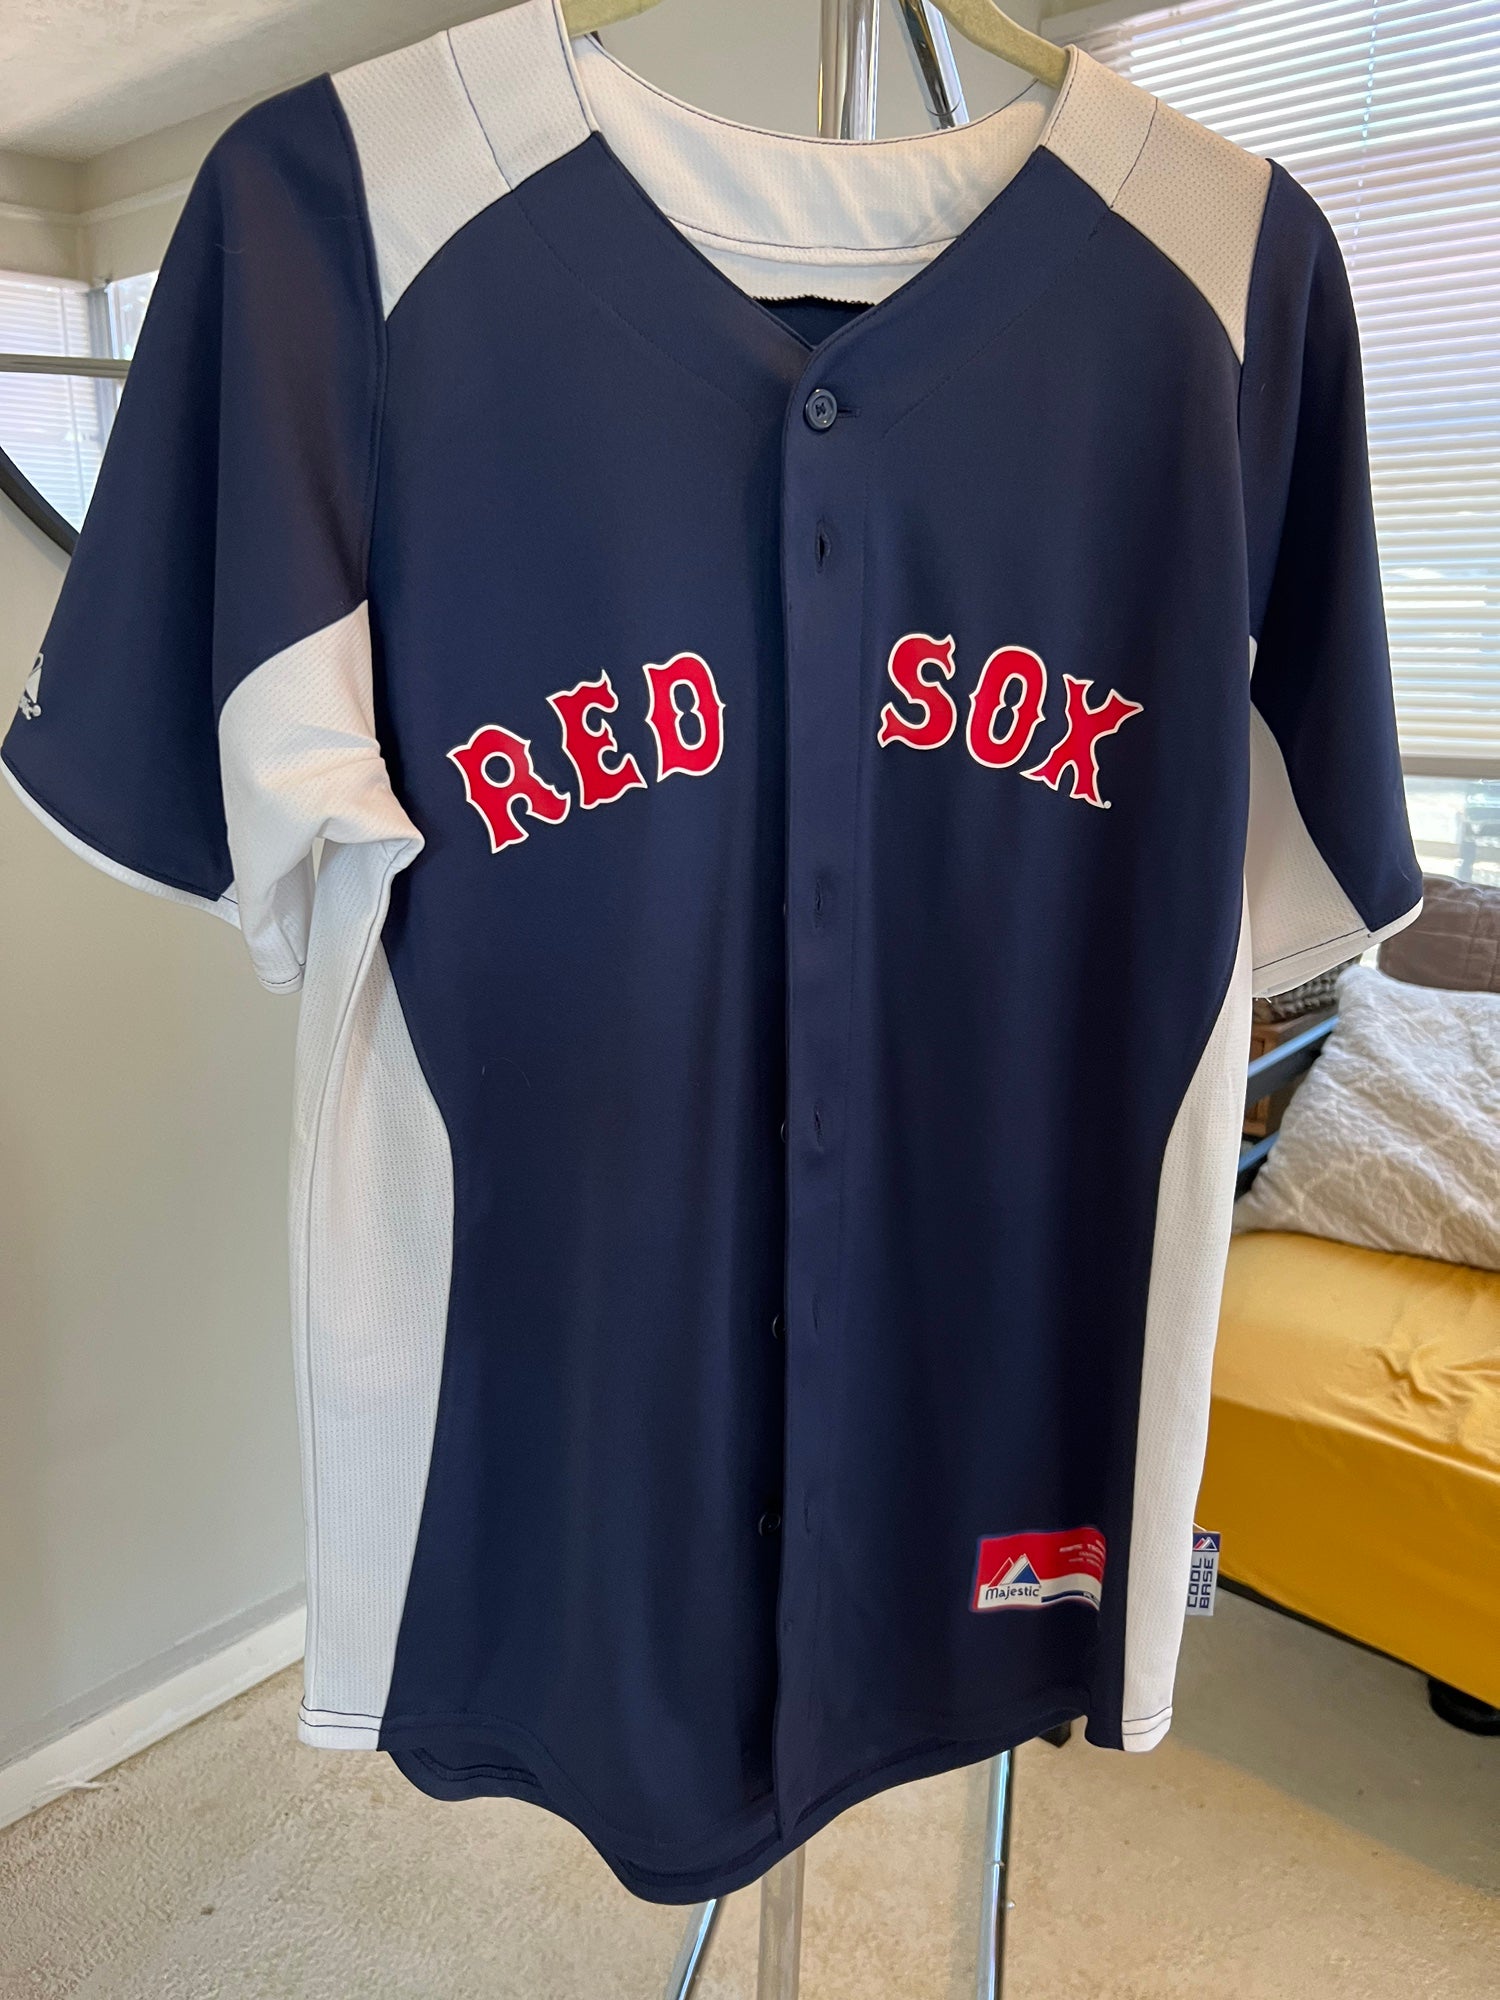 boston red sox infant jersey